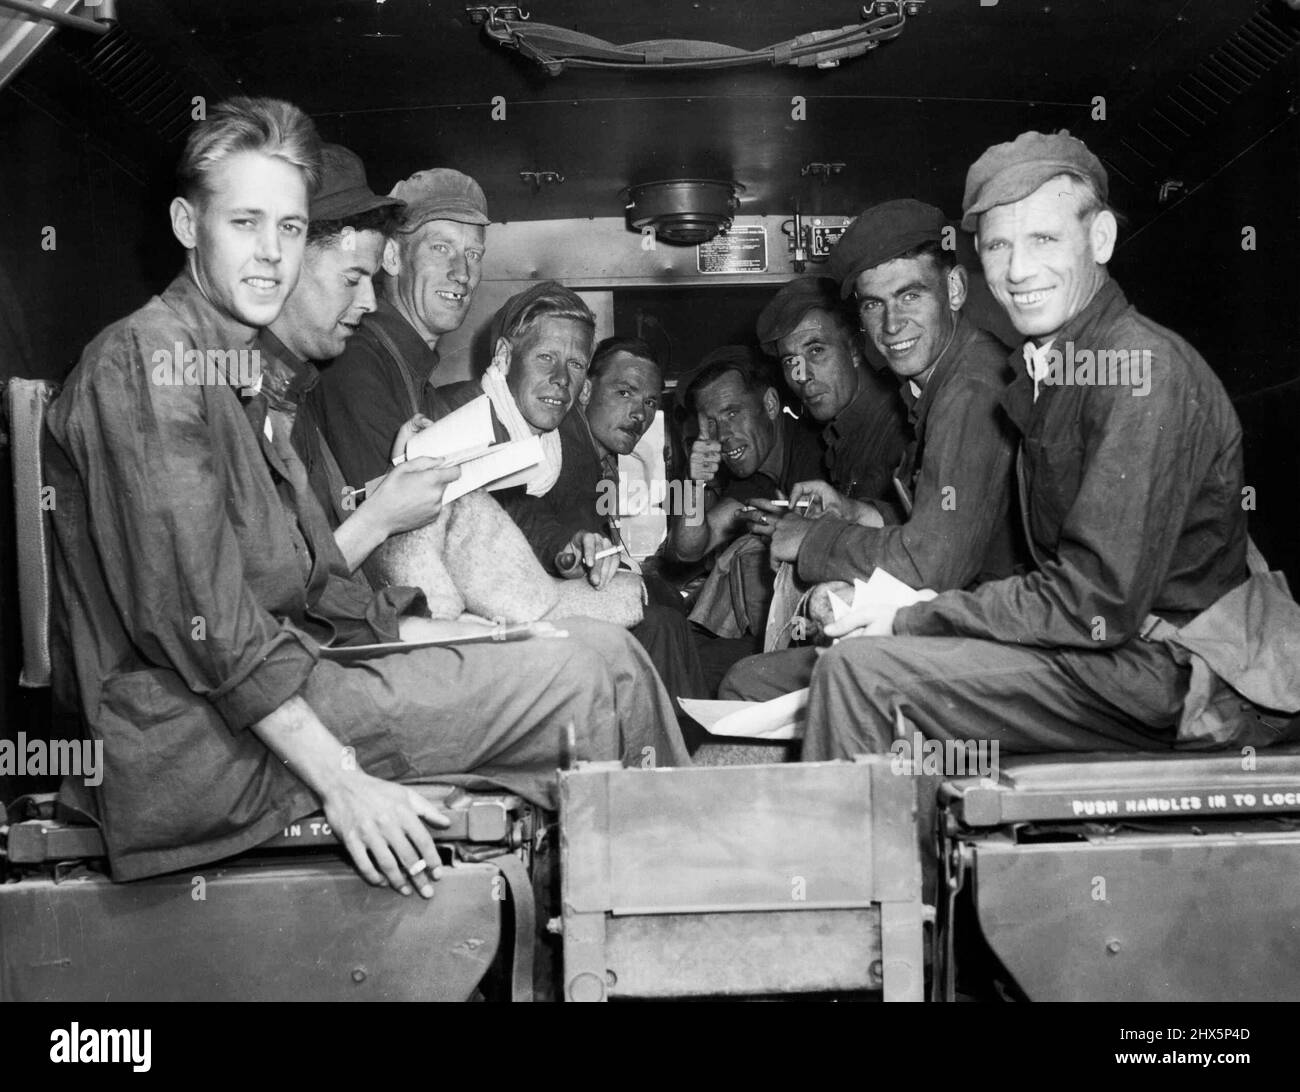 Happy Englishmen -- British troops repatriated Aug. 6. at Panmunjom, sit in the back of a UN ambulance awaiting the trip to Freedom Village. Left to right: Pvt. Derrick Ackroyd, Guilstead Bingley, Yorkshire; William Smith, George Smith, Herringhorne, Rotherham; Bob Parker; L/Cp Allen McKell, Glasgow, S.W.3; Rflm Edward English, Lisborn county, Antin, North Ireland; Rflm Pat Morgan of a Lisburn county, Antrim, North Ireland; Pvt. Frank Morrell, Abroathangus, Scotland, and Felix O'Hanlon. August 8, 1953. (Photo by Associated Press Photo). Stock Photo